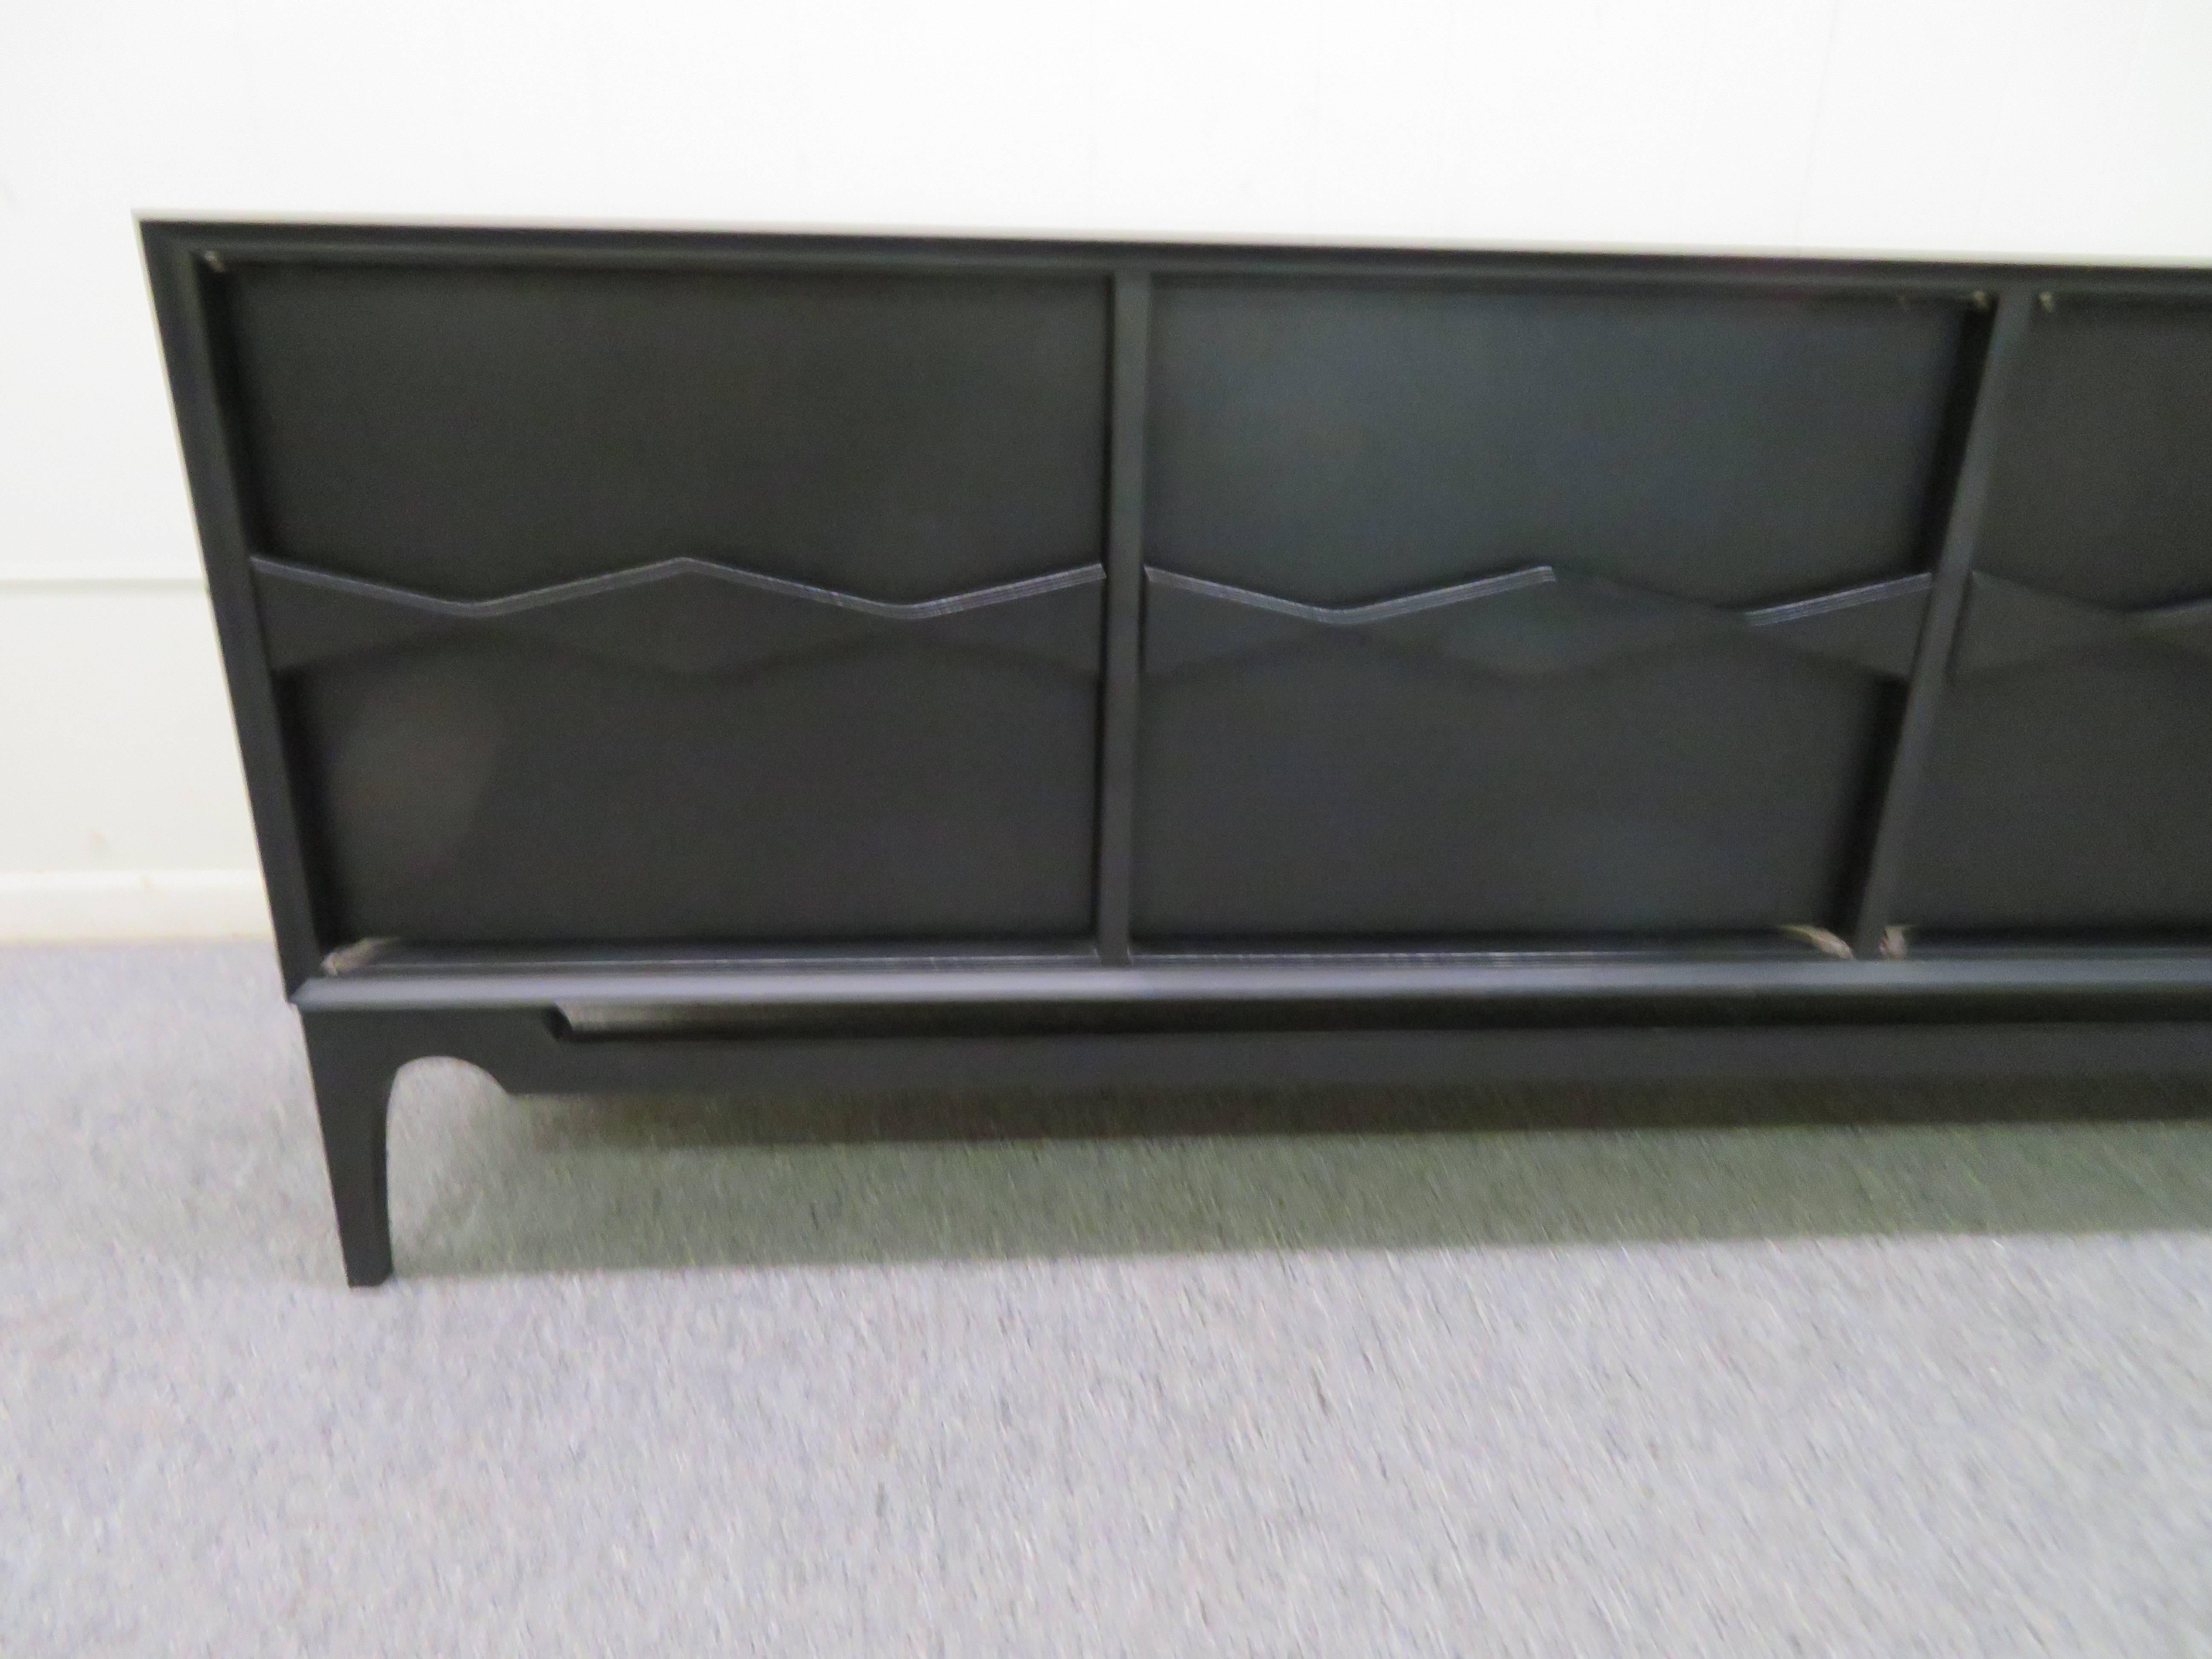 Spectacular Asian Modern Chinoiserie Lacquered Credenza Hutch, Mid-Century In Good Condition For Sale In Pemberton, NJ